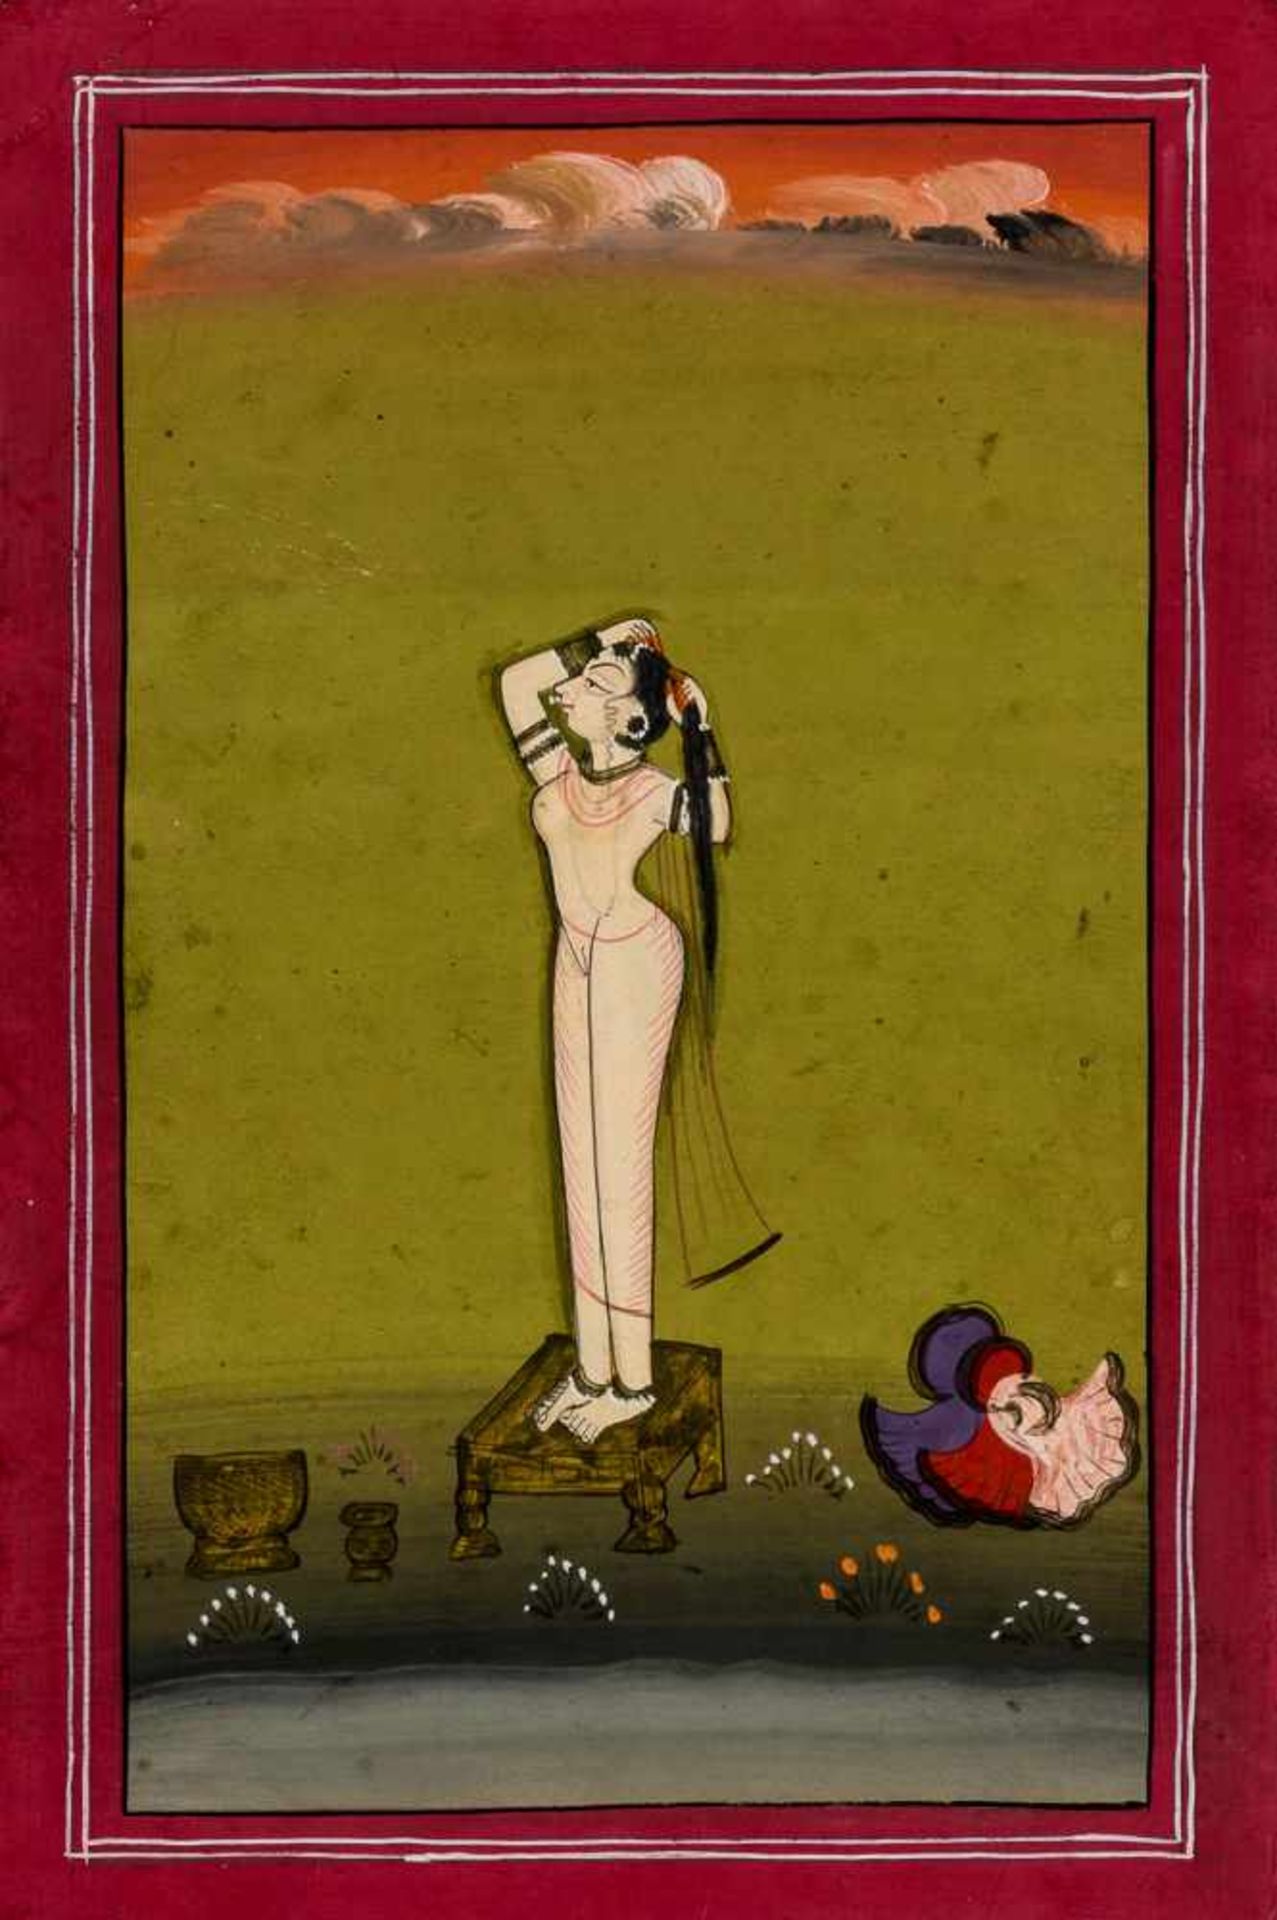 AN EROTIC MINIATURE PAINTING - INDIA, 19TH – EARLY 20th CENTURYGouache on paper India, late 19th –